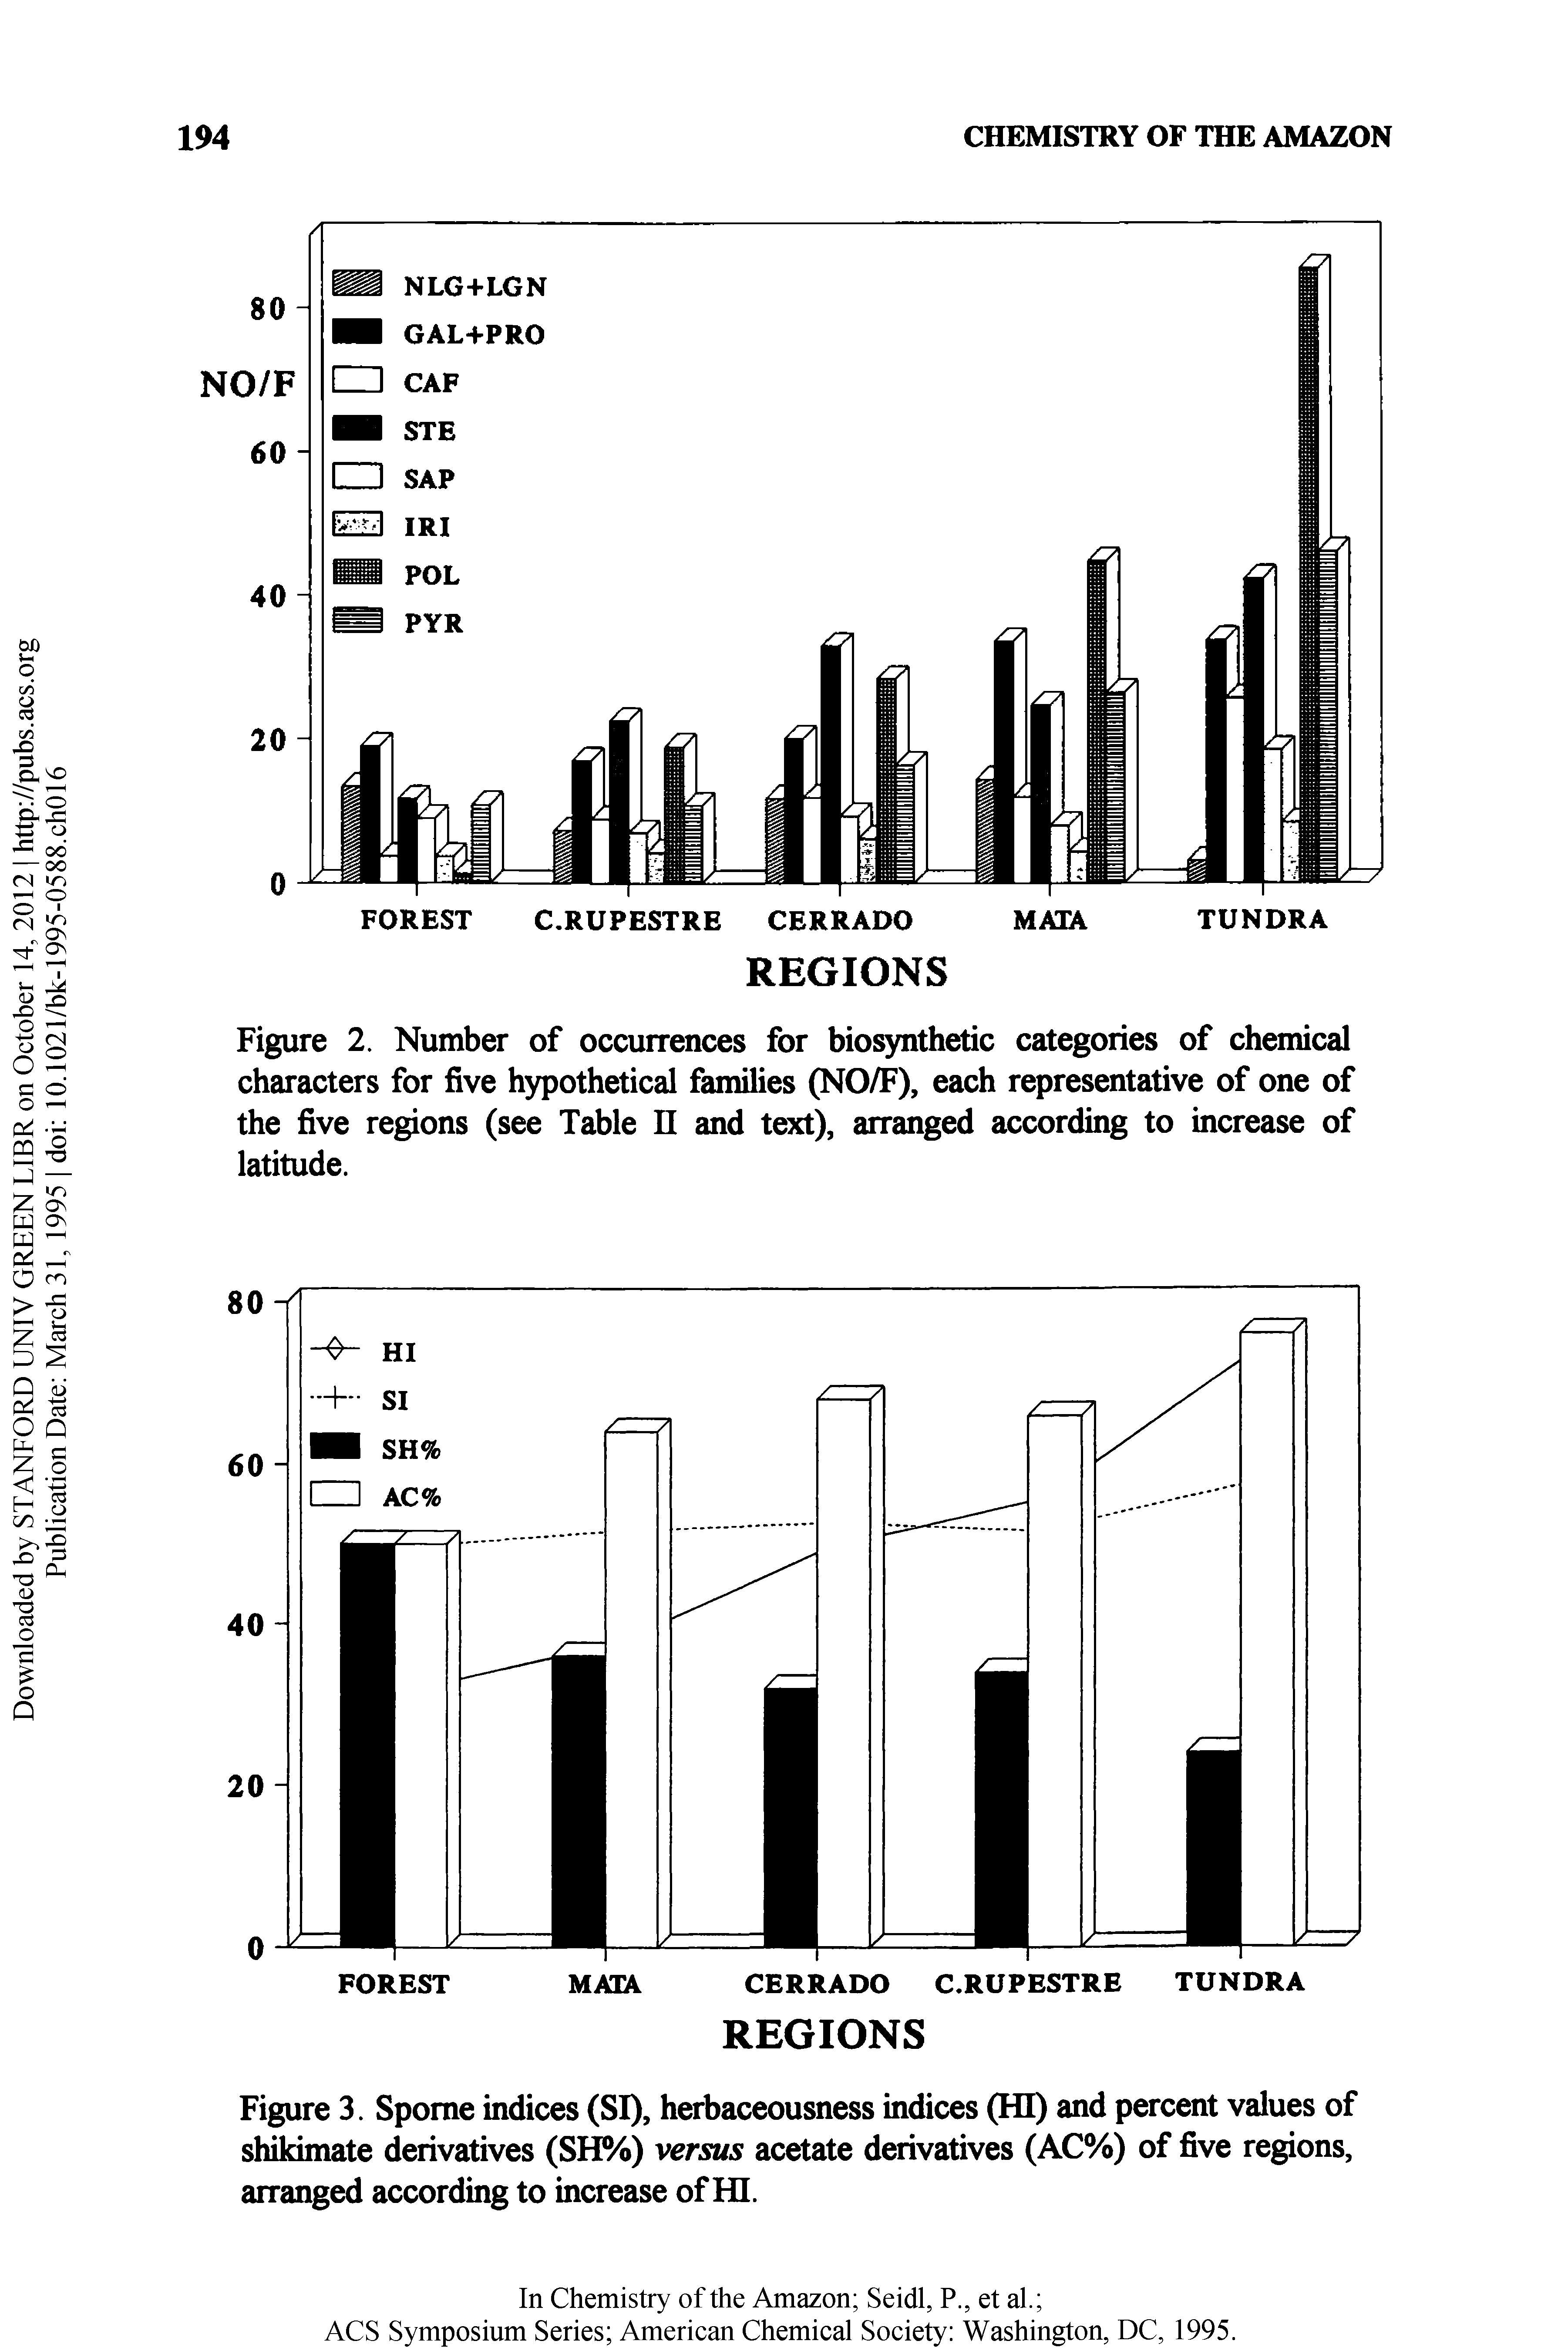 Figure 3. Spome indices (SI), herbaceousness indices (HI) and percent values of shikimate derivatives (SH%) versus acetate derivatives (AC%) of five regions, arranged according to increase of HI.